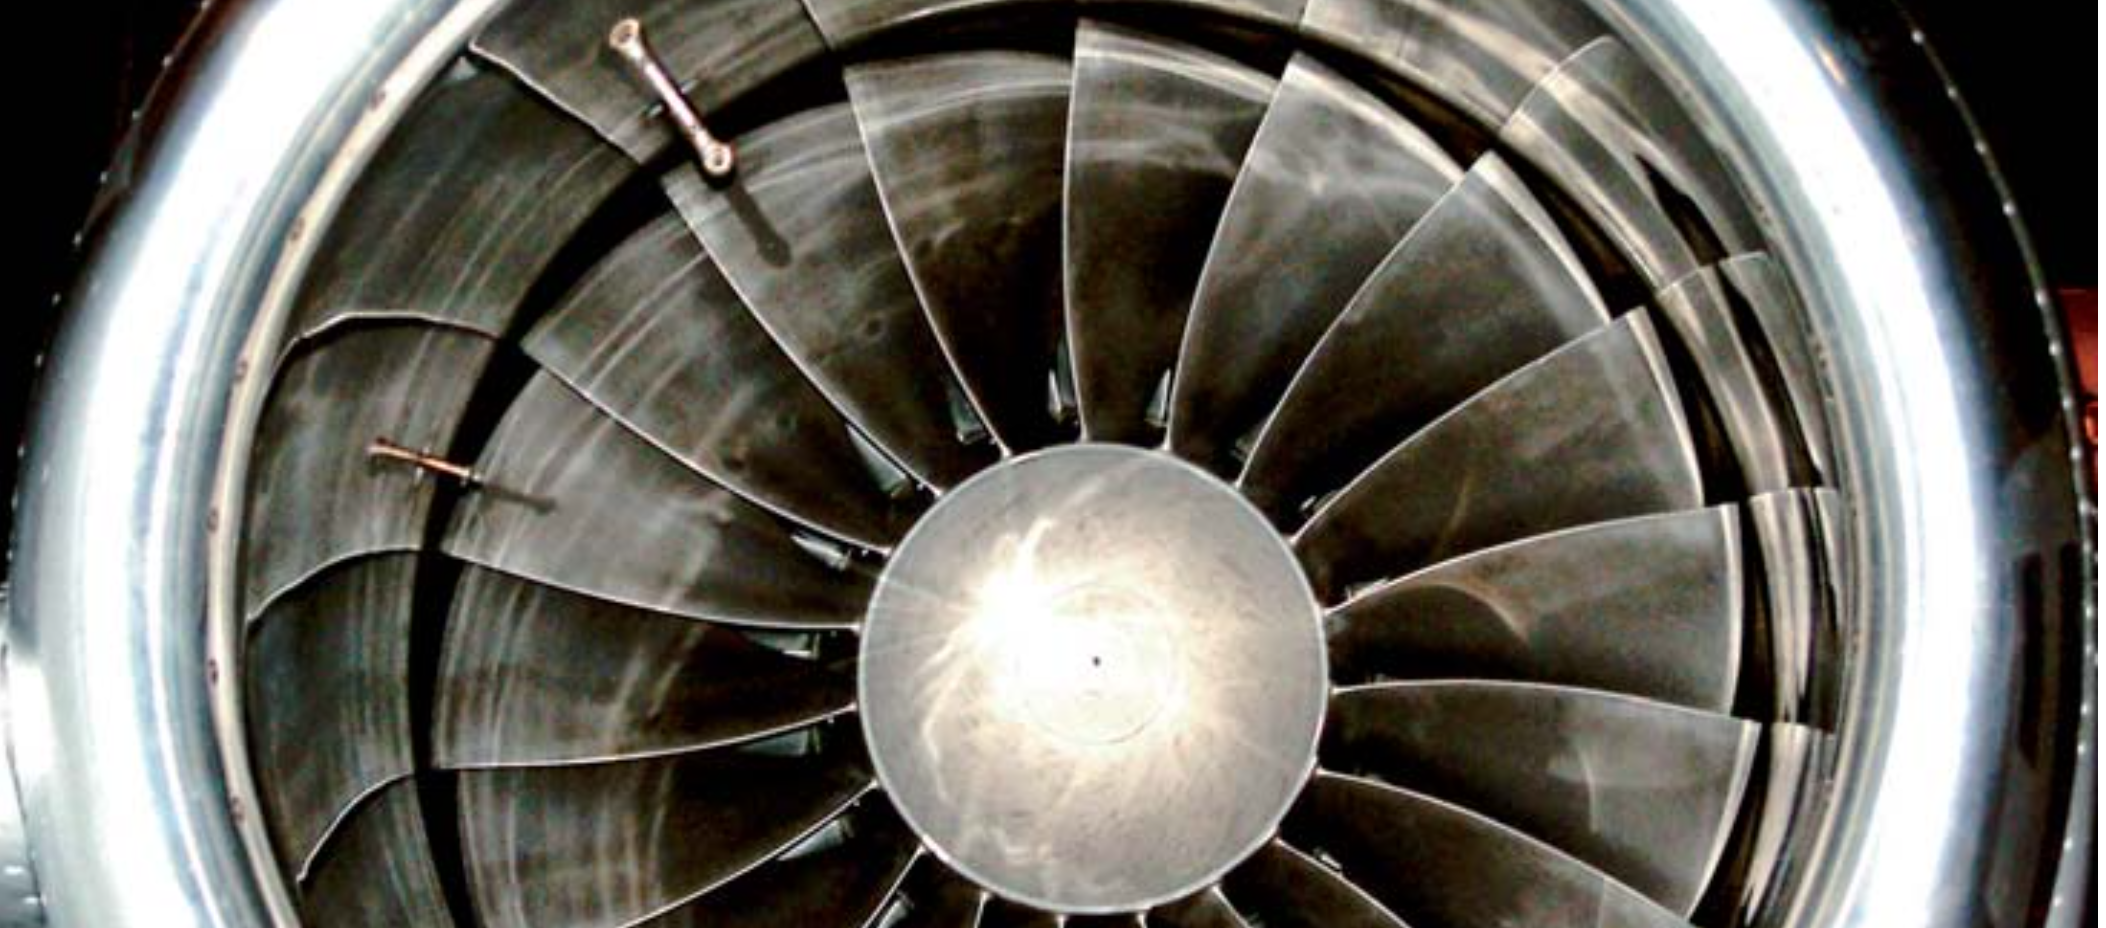 The future of aircraft propulsion